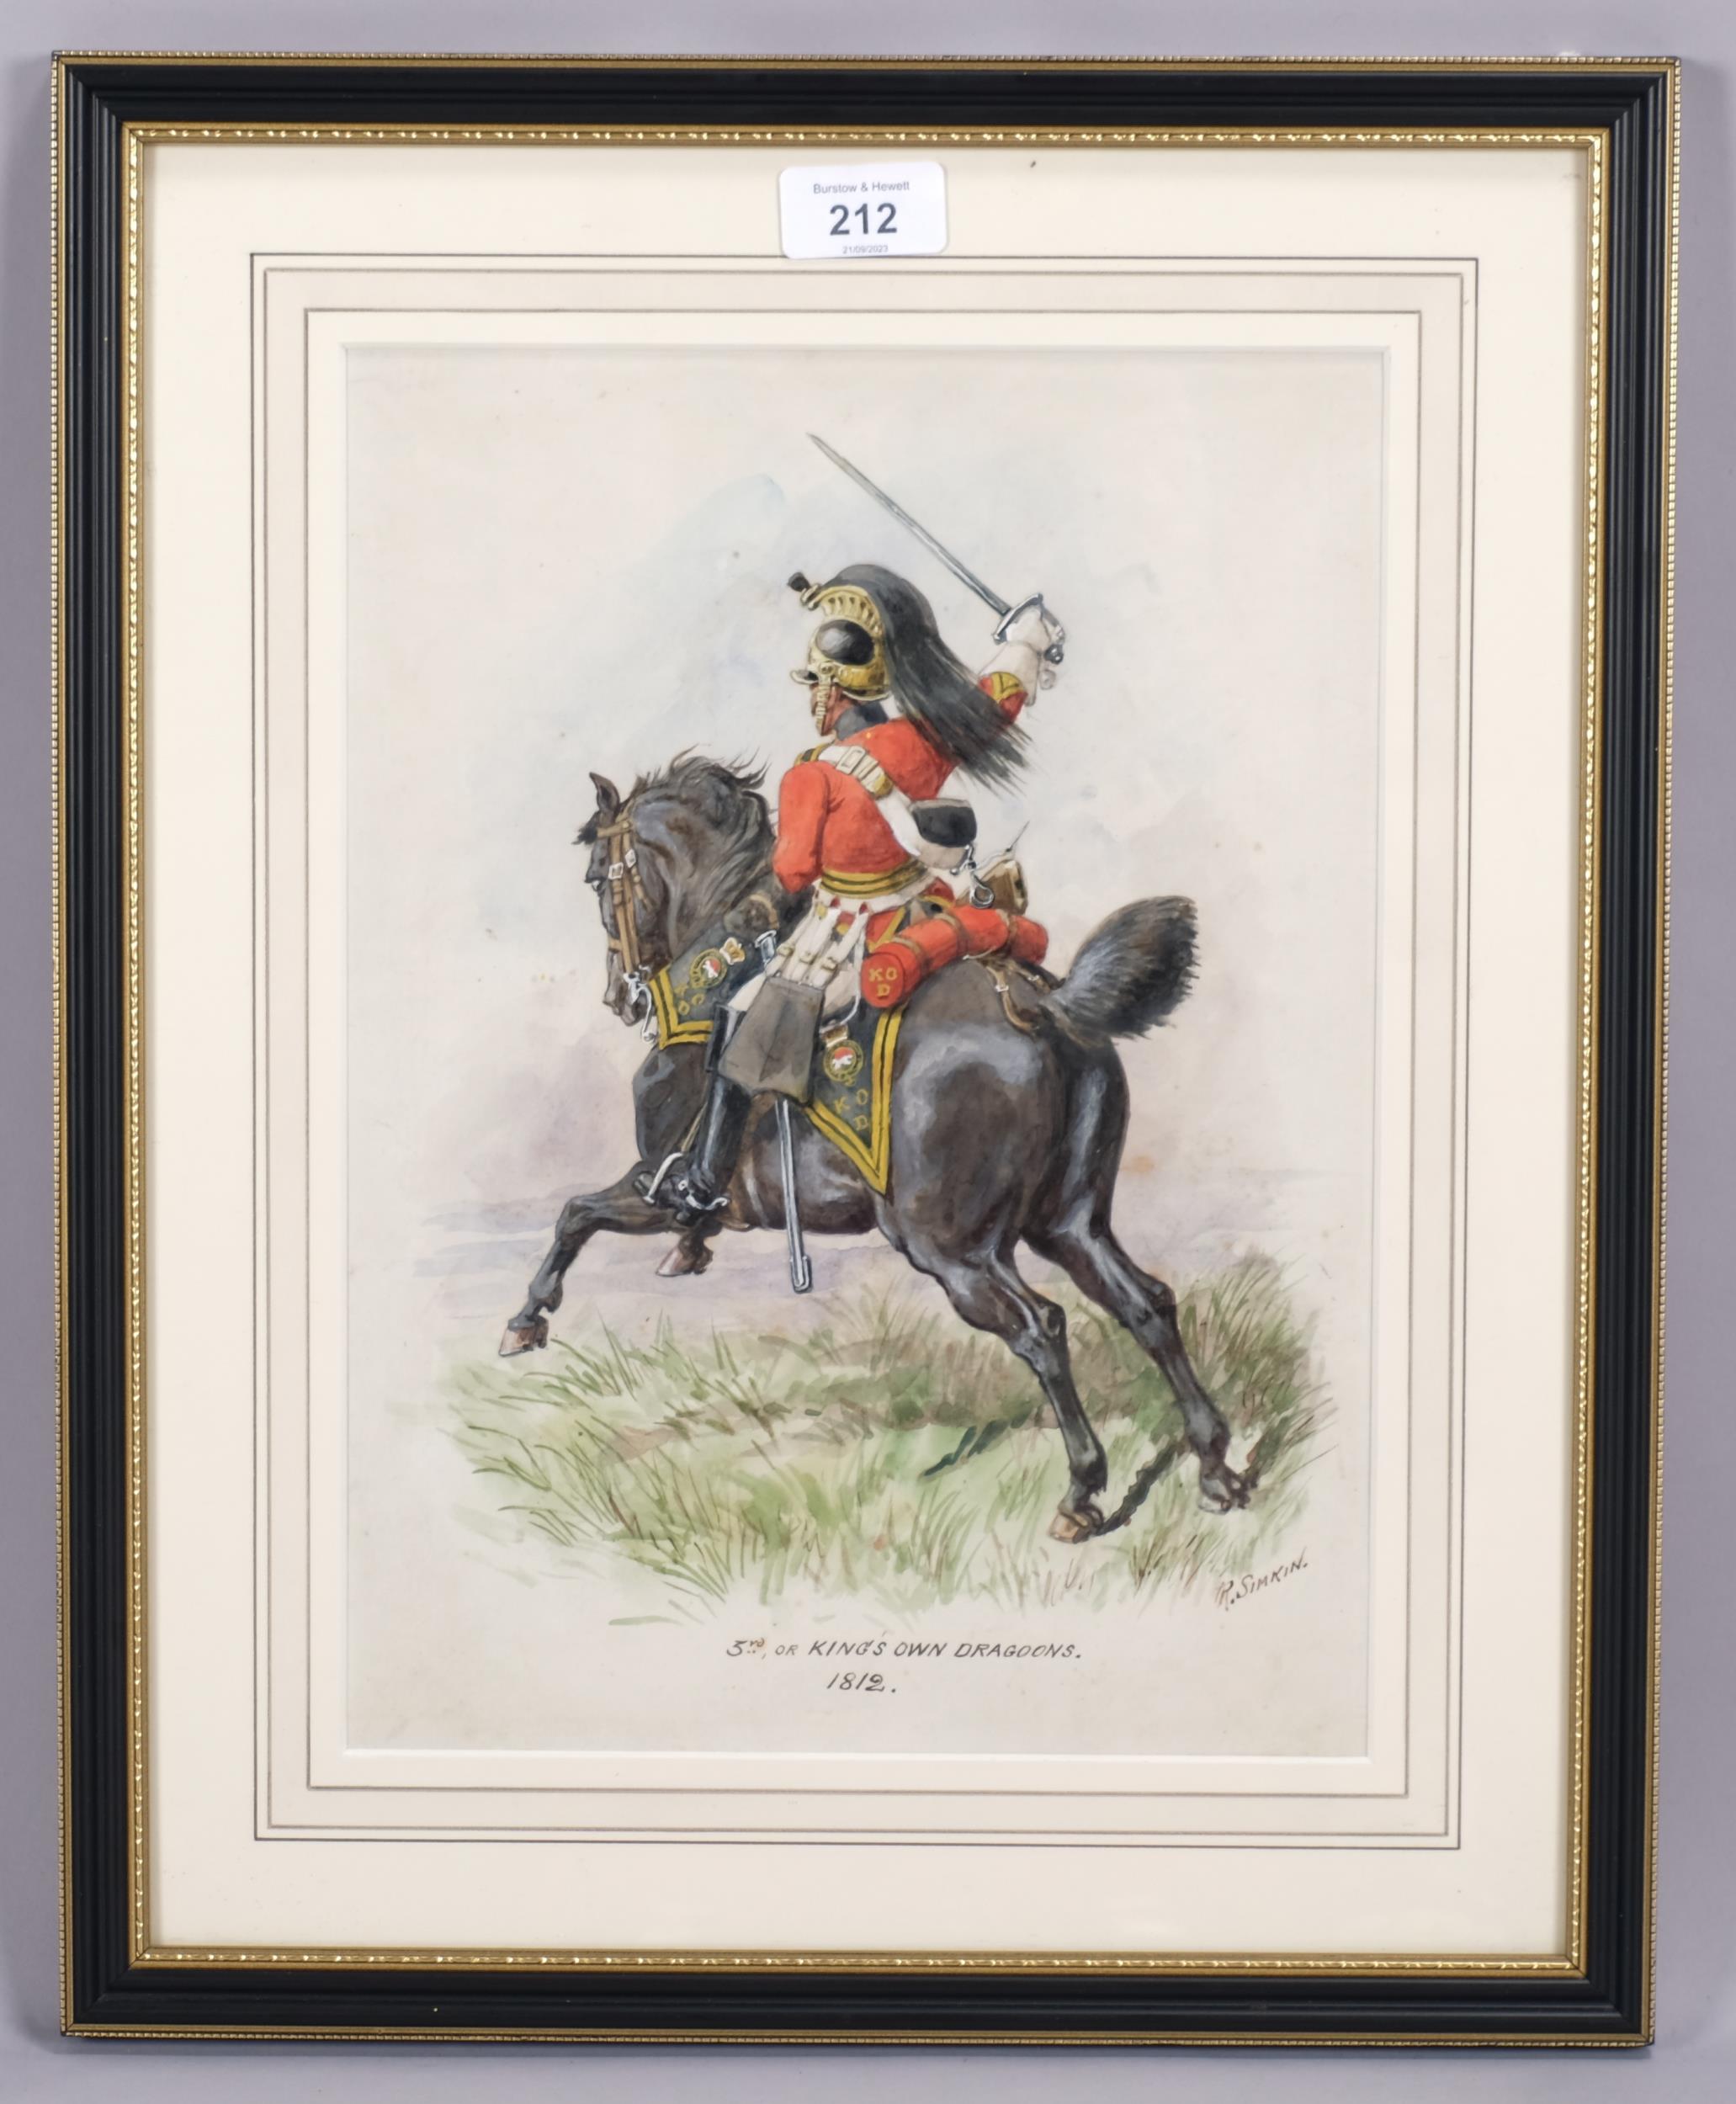 Richard Simpkin (1840 - 1926), 3rd or King's Own Dragoons 1812, watercolour/gouache, signed, 33cm - Image 2 of 4